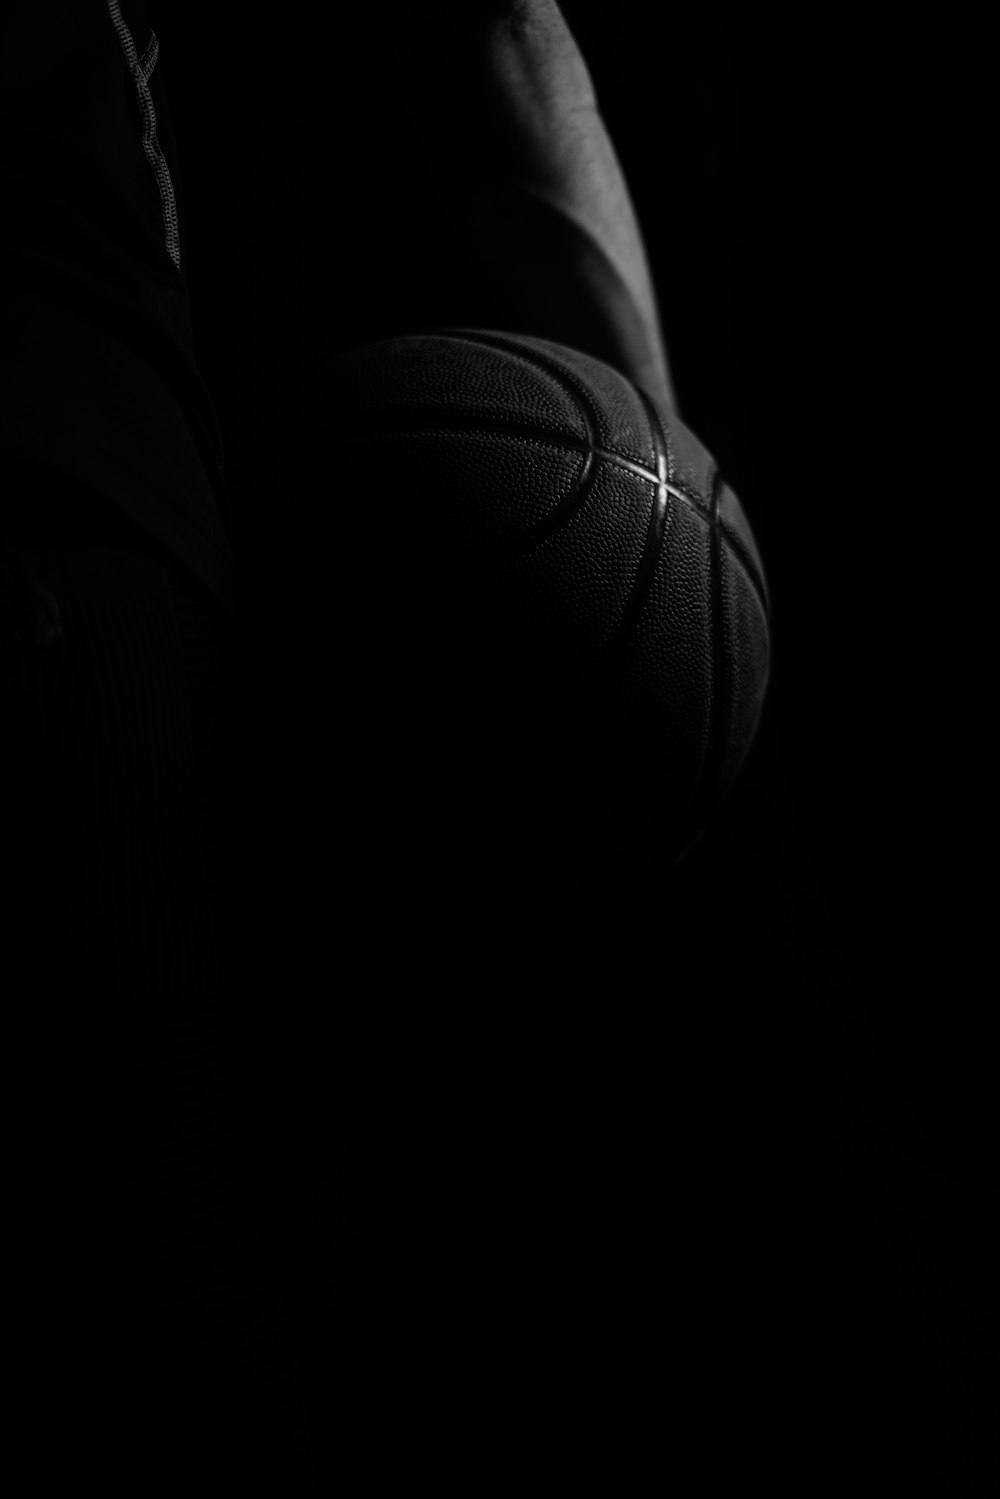 basketball in black and white photography